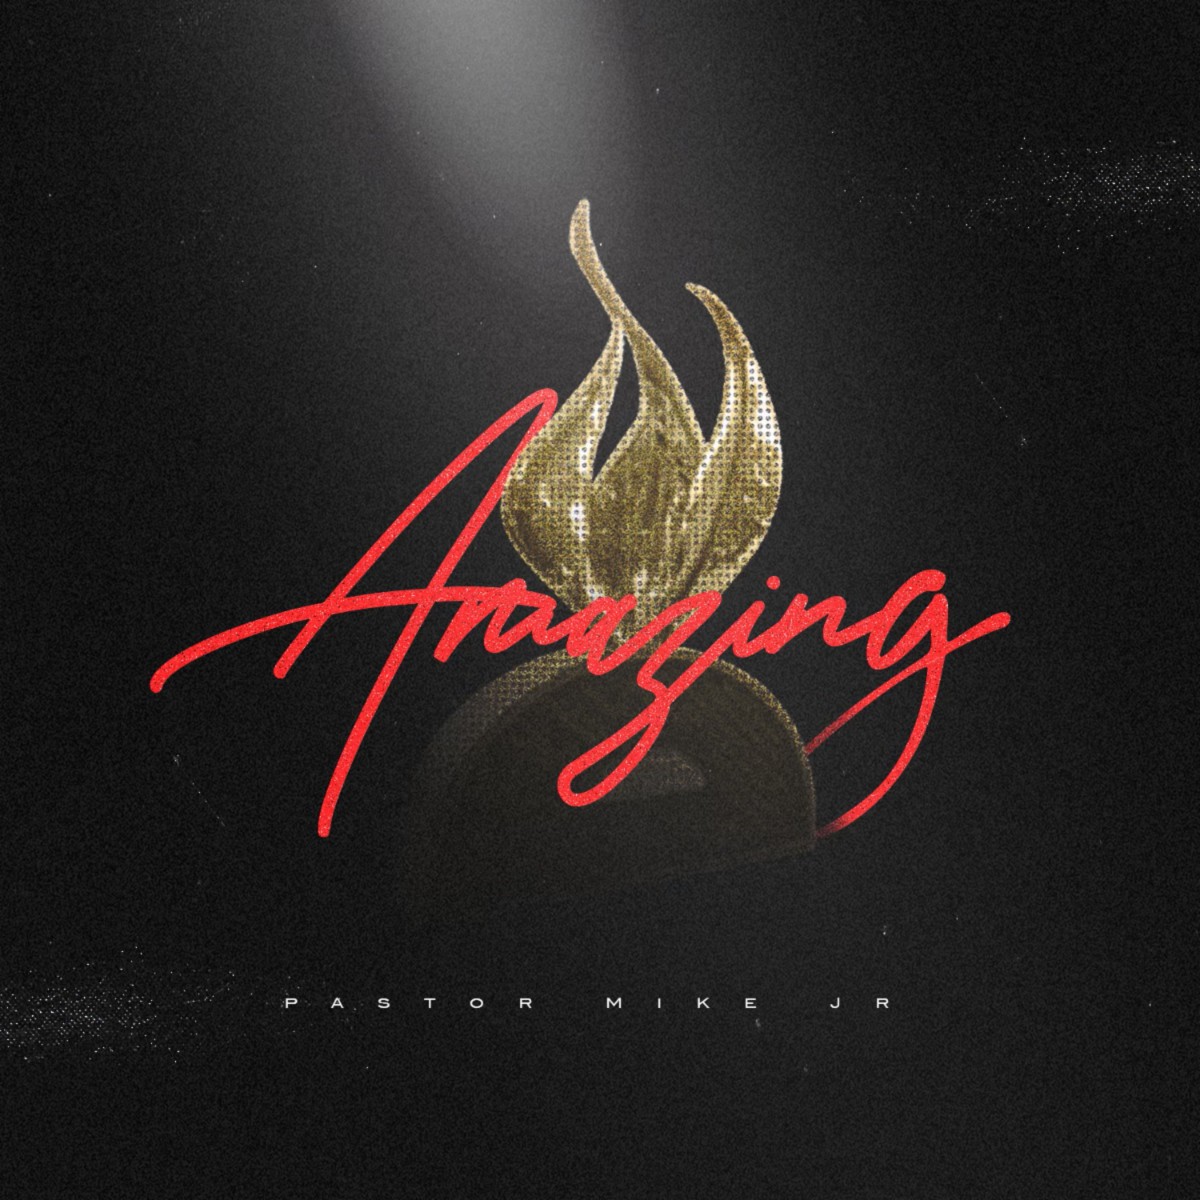 Art for Amazing by Pastor Mike Jr.